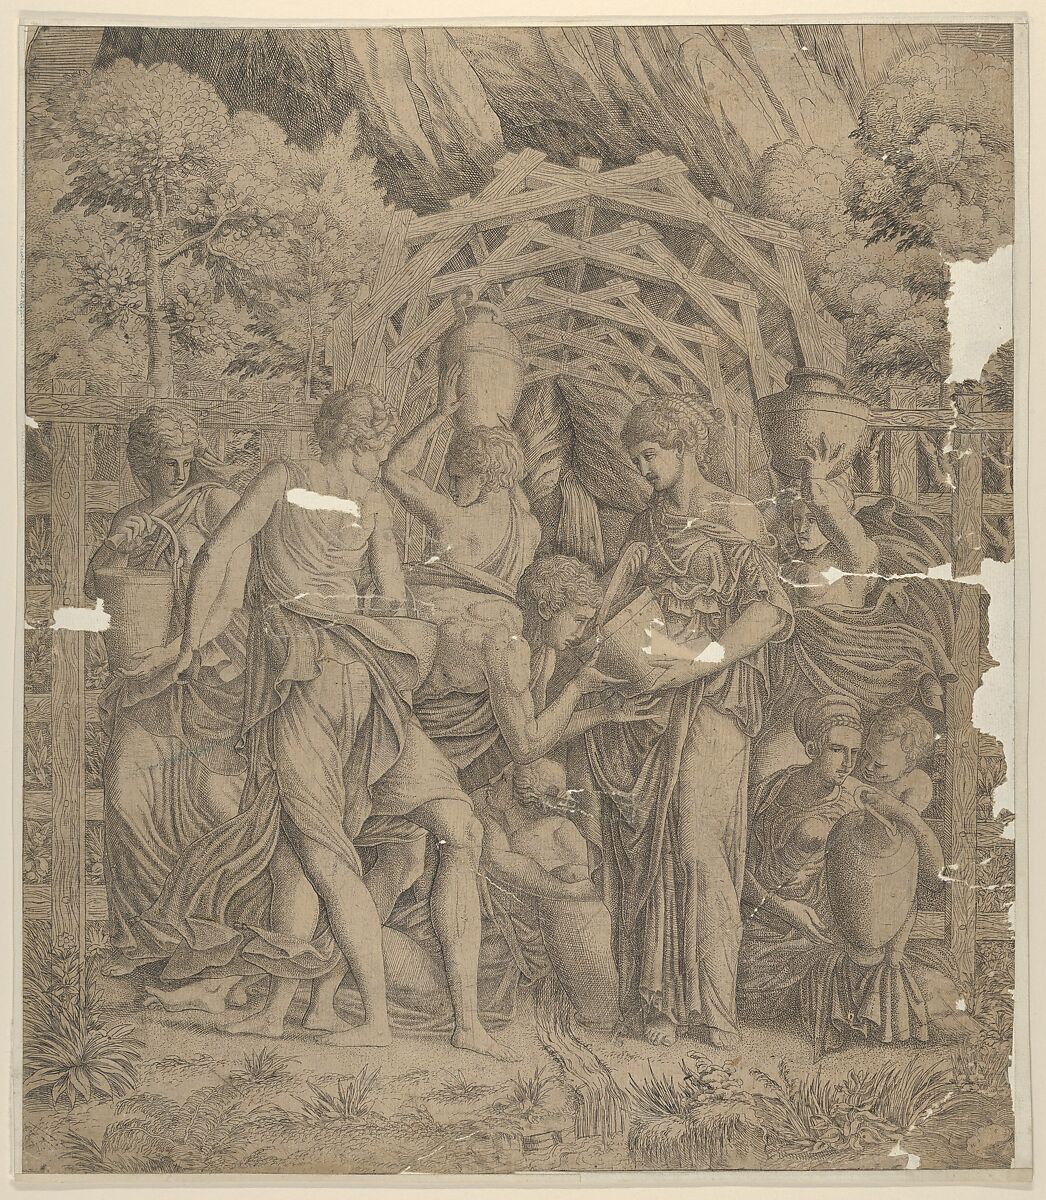 Rebecca and Eliezer at the Well, Master IQV (French, active 1540–50), Etching 